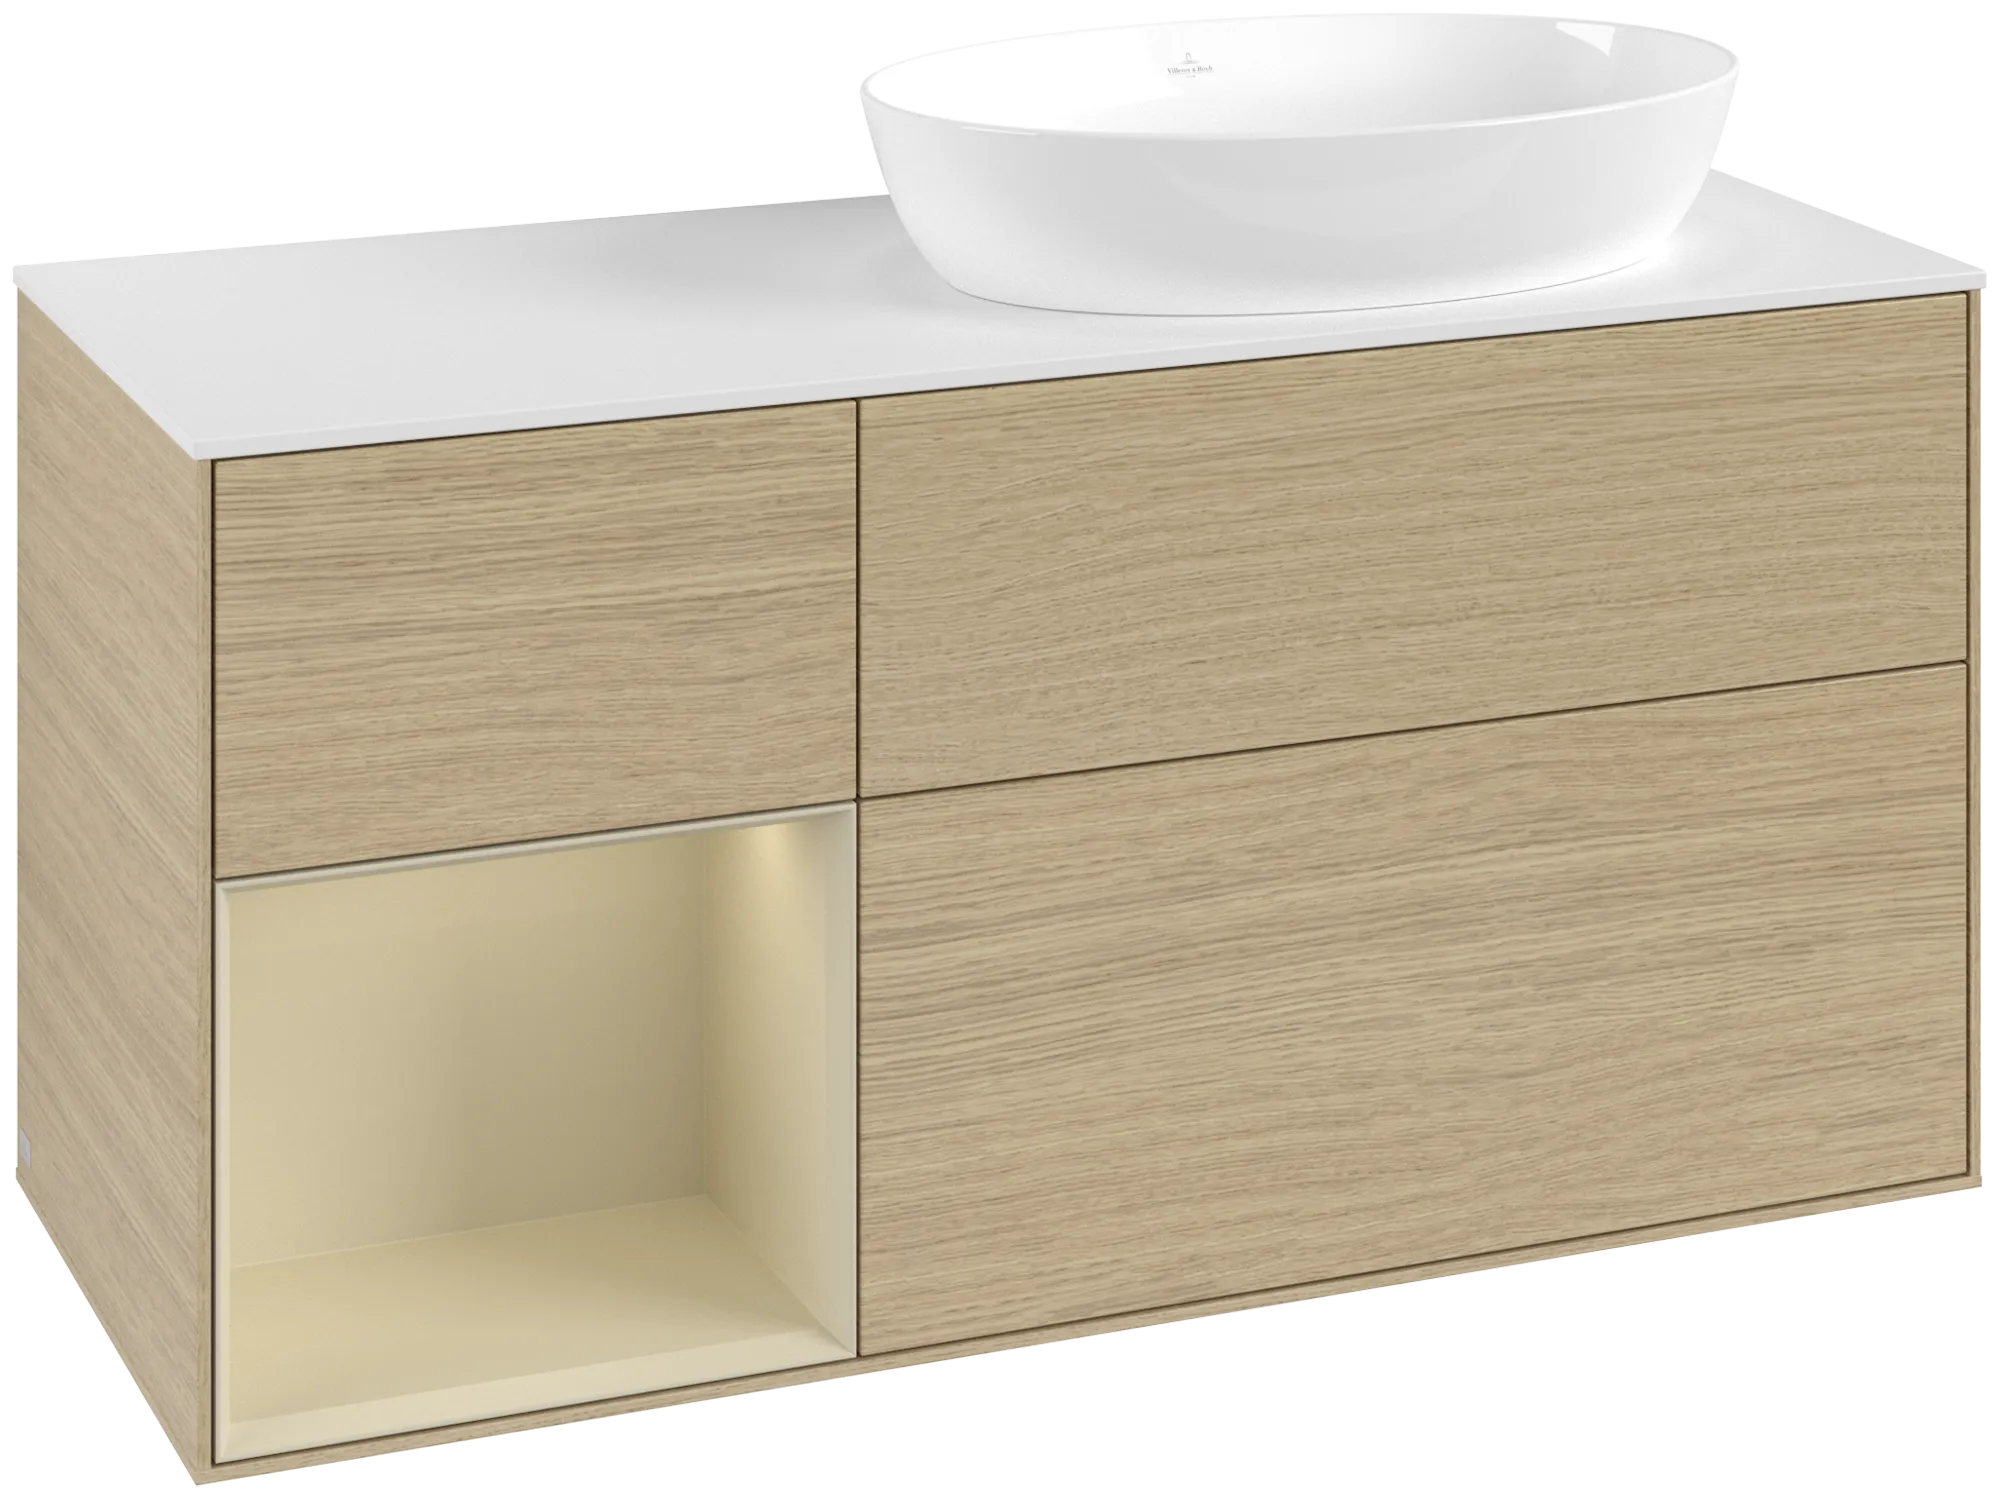 Picture of VILLEROY BOCH Finion Vanity unit, with lighting, 3 pull-out compartments, 1200 x 603 x 501 mm, Oak Veneer / Silk Grey Matt Lacquer / Glass White Matt #GA41HJPC